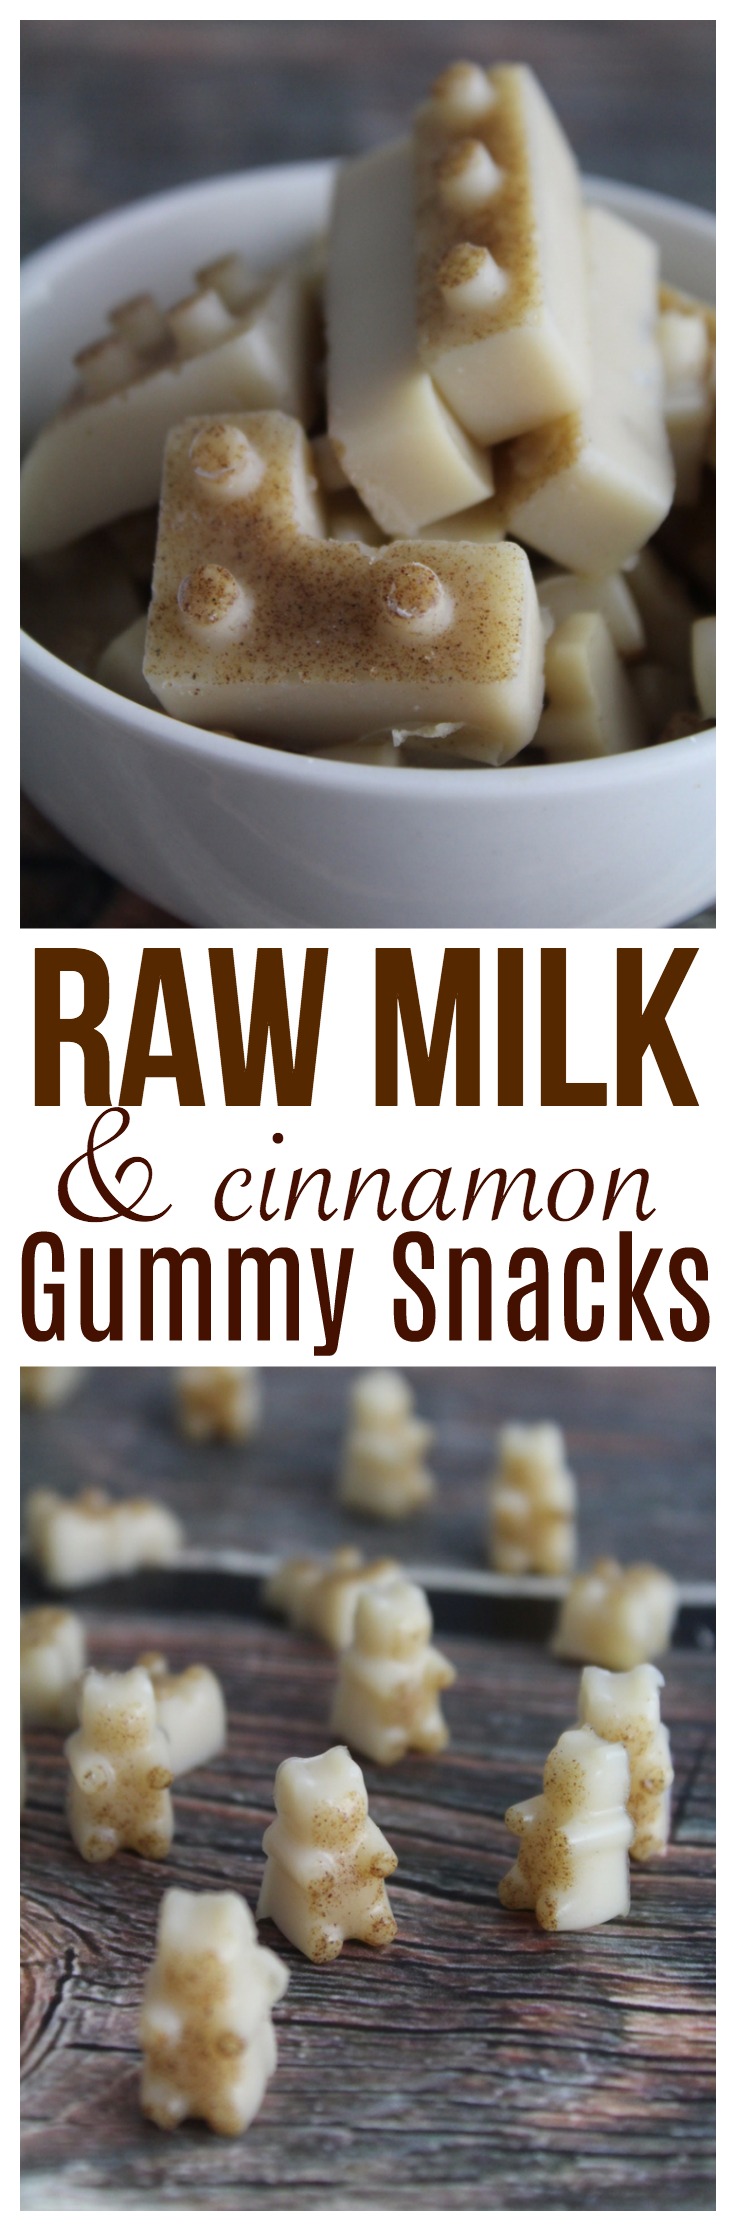 Homemade, healthy gummy snacks that are kid friendly and loaded with nutrients that are wonderful for supporting a healthy immune system.